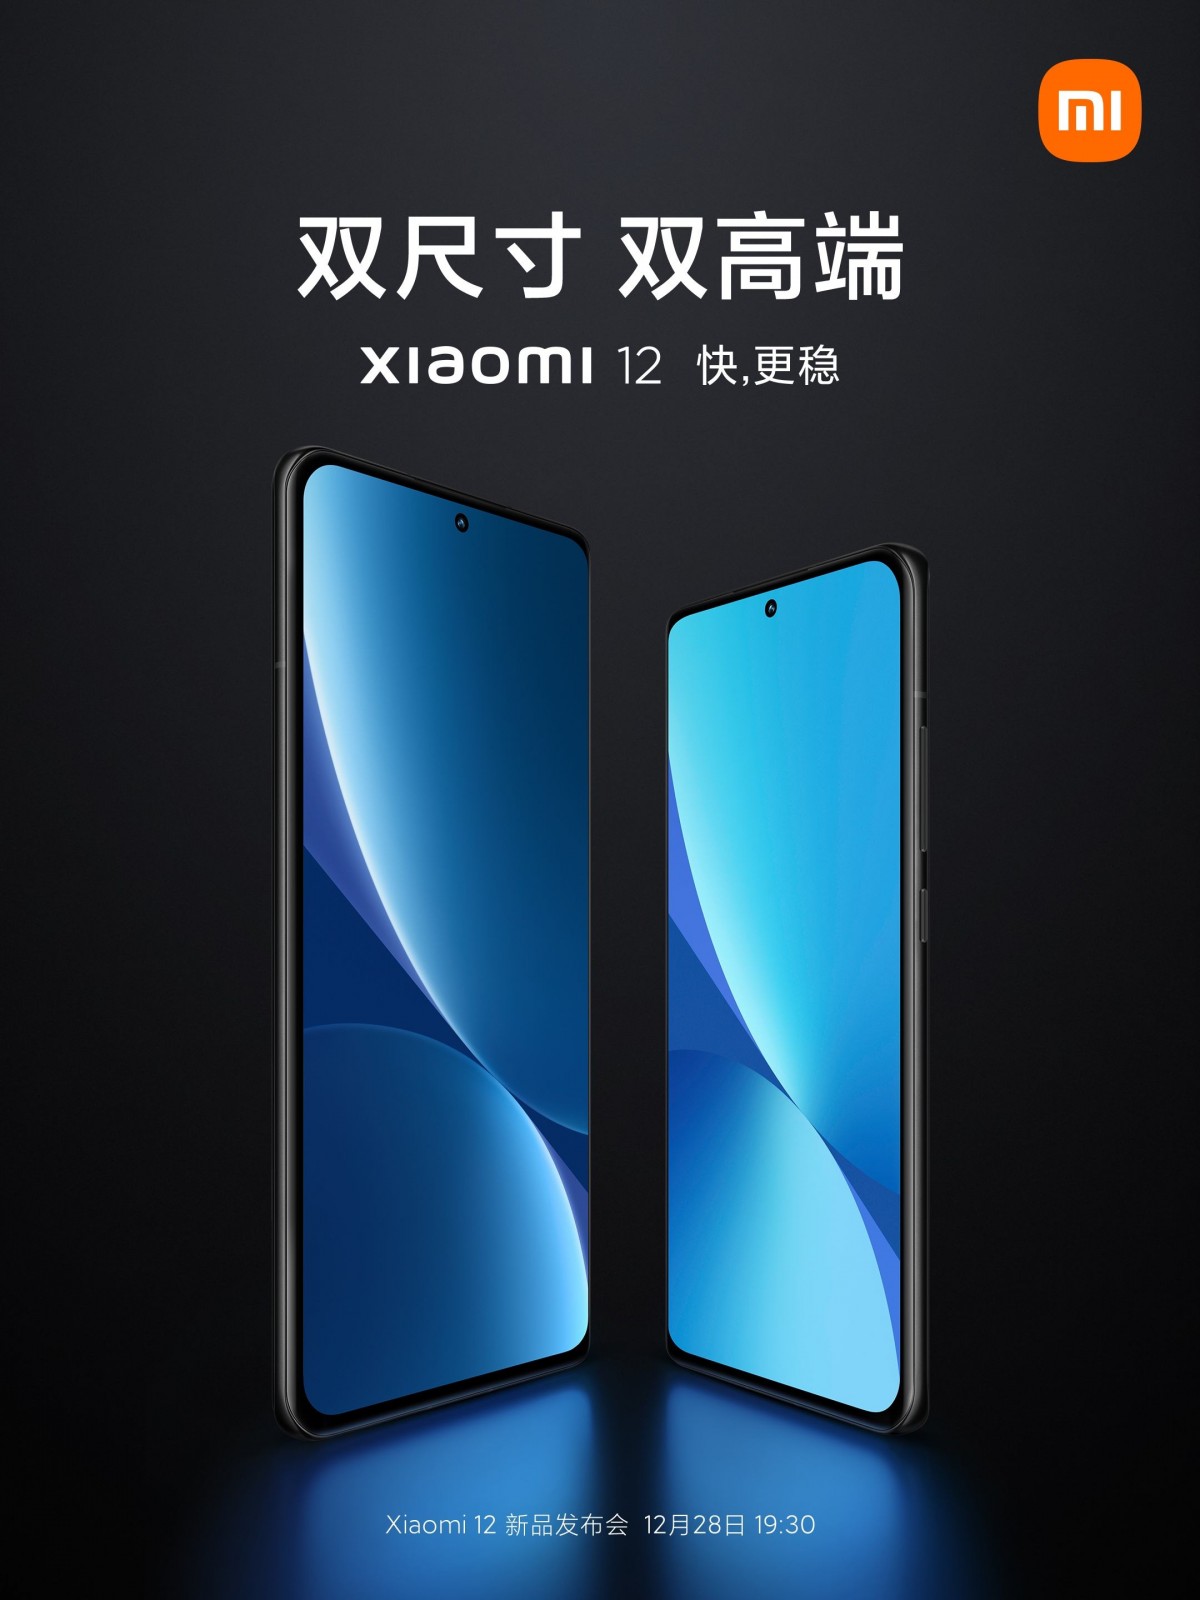 Xiaomi confirms only two flagships will launch on Dec 28, teases design